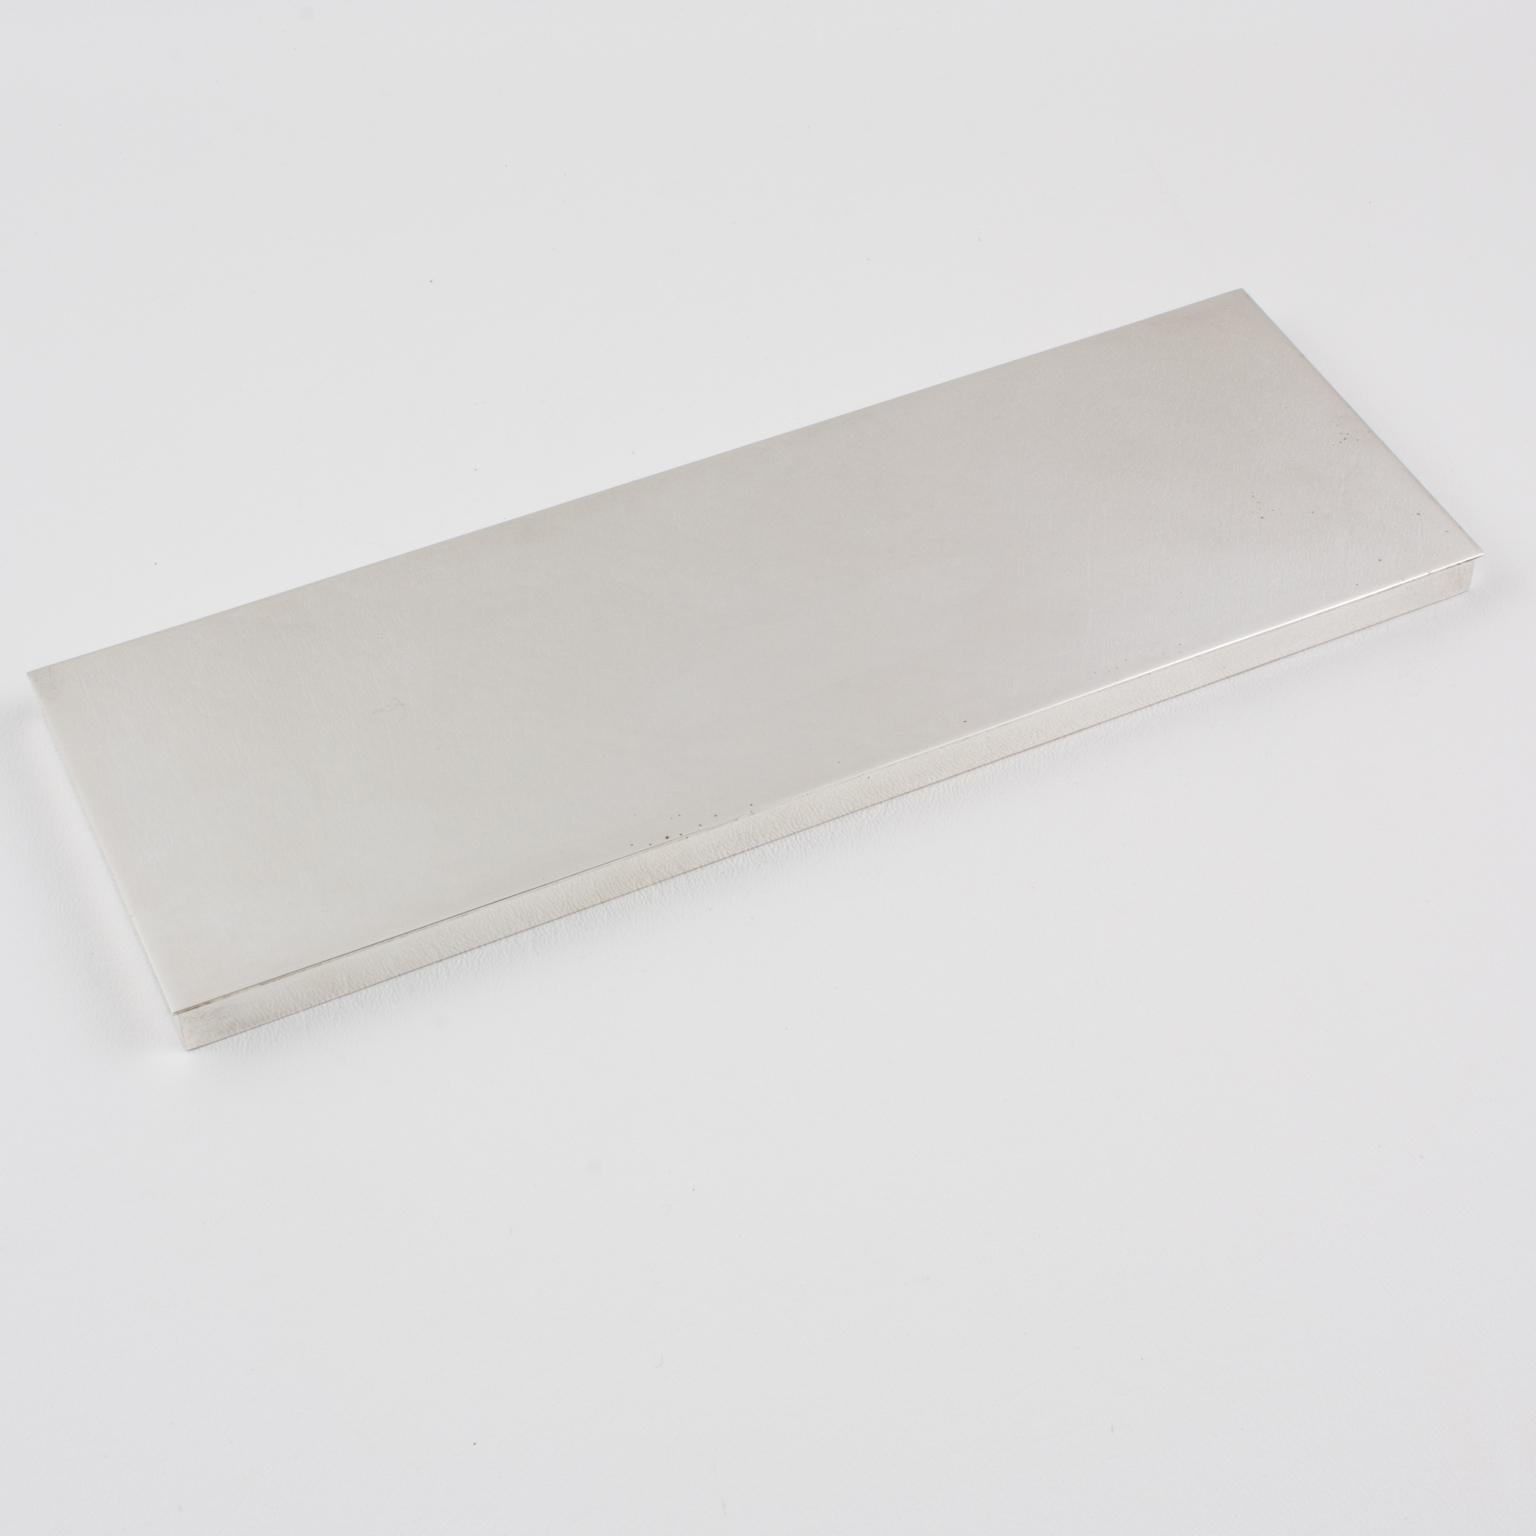 Metal Modernist Extra Long and Flat Silver Plate Box, 1960s For Sale